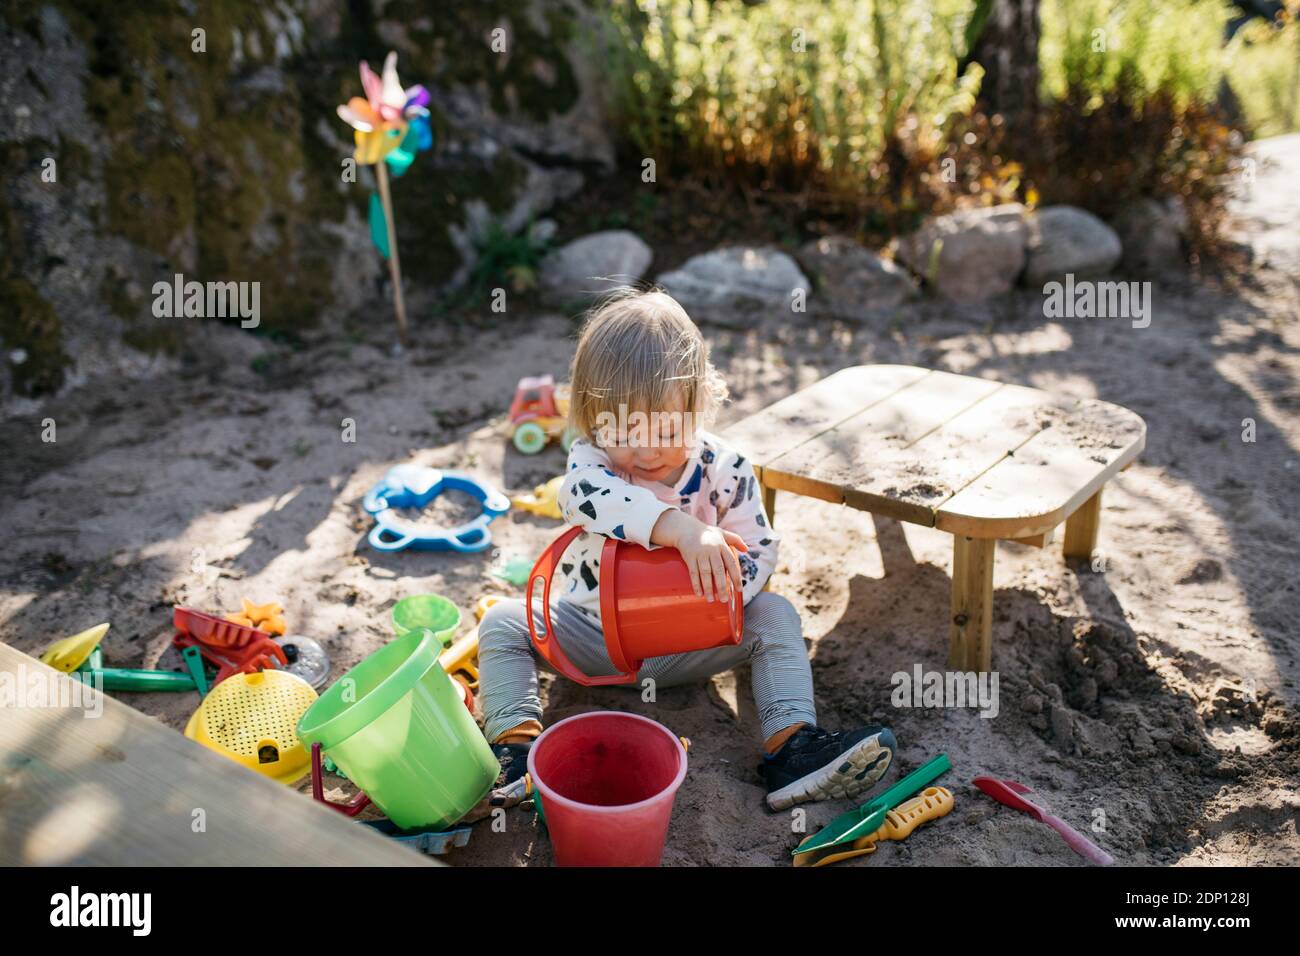 Girl playing in sandpit Stock Photo